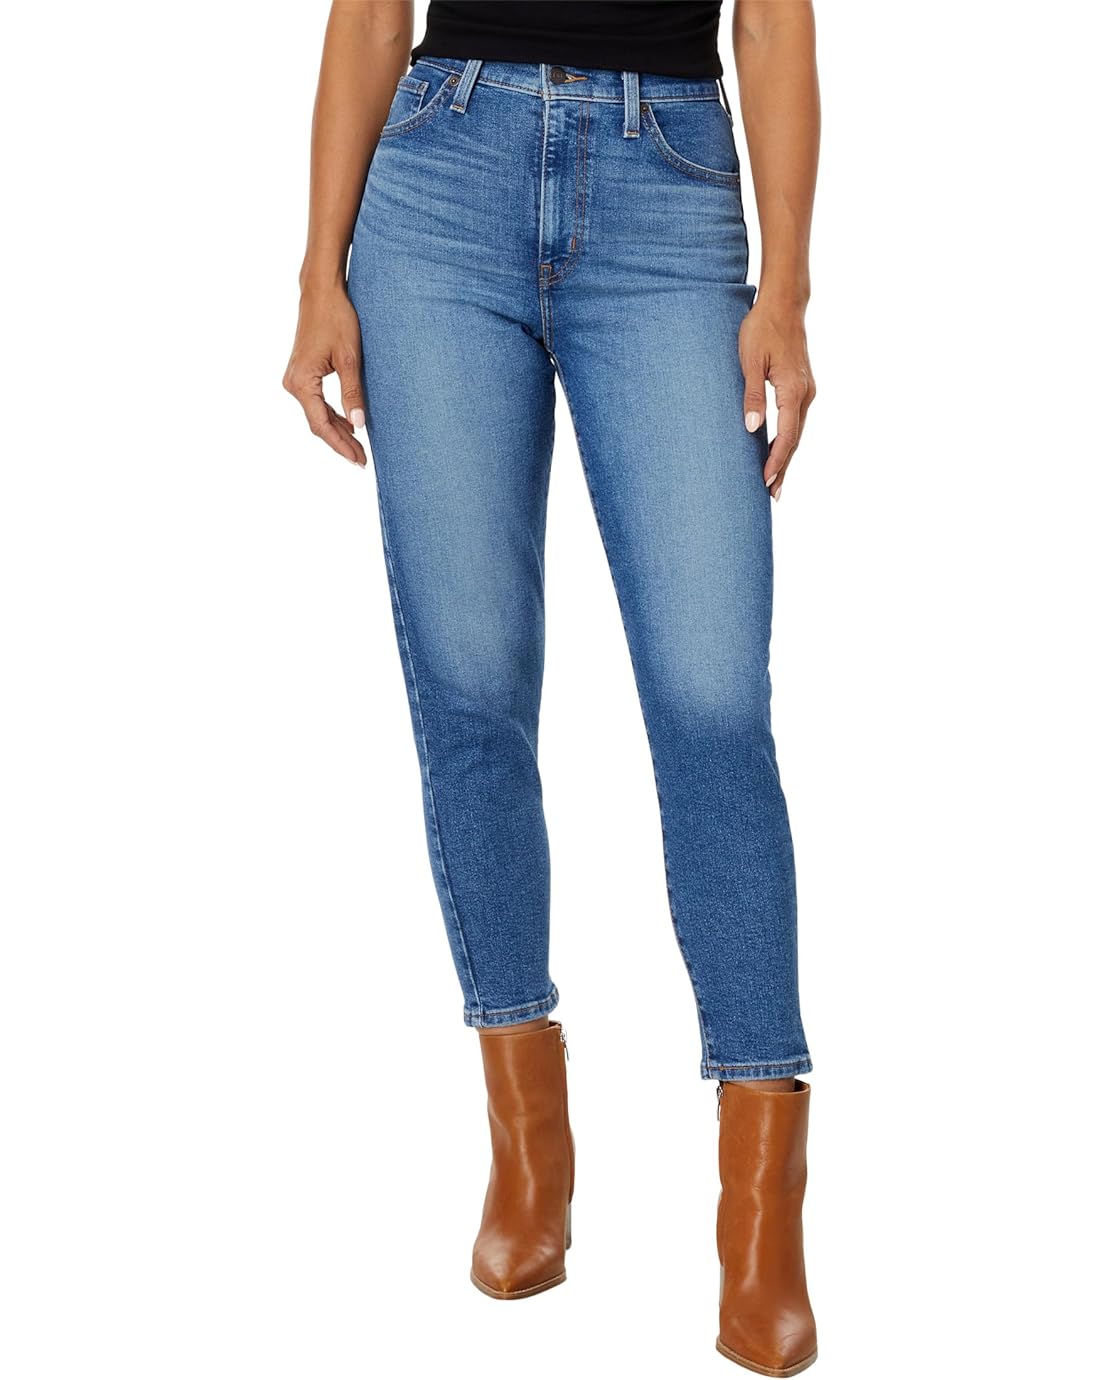 Levis Womens High-Waisted Mom Jeans